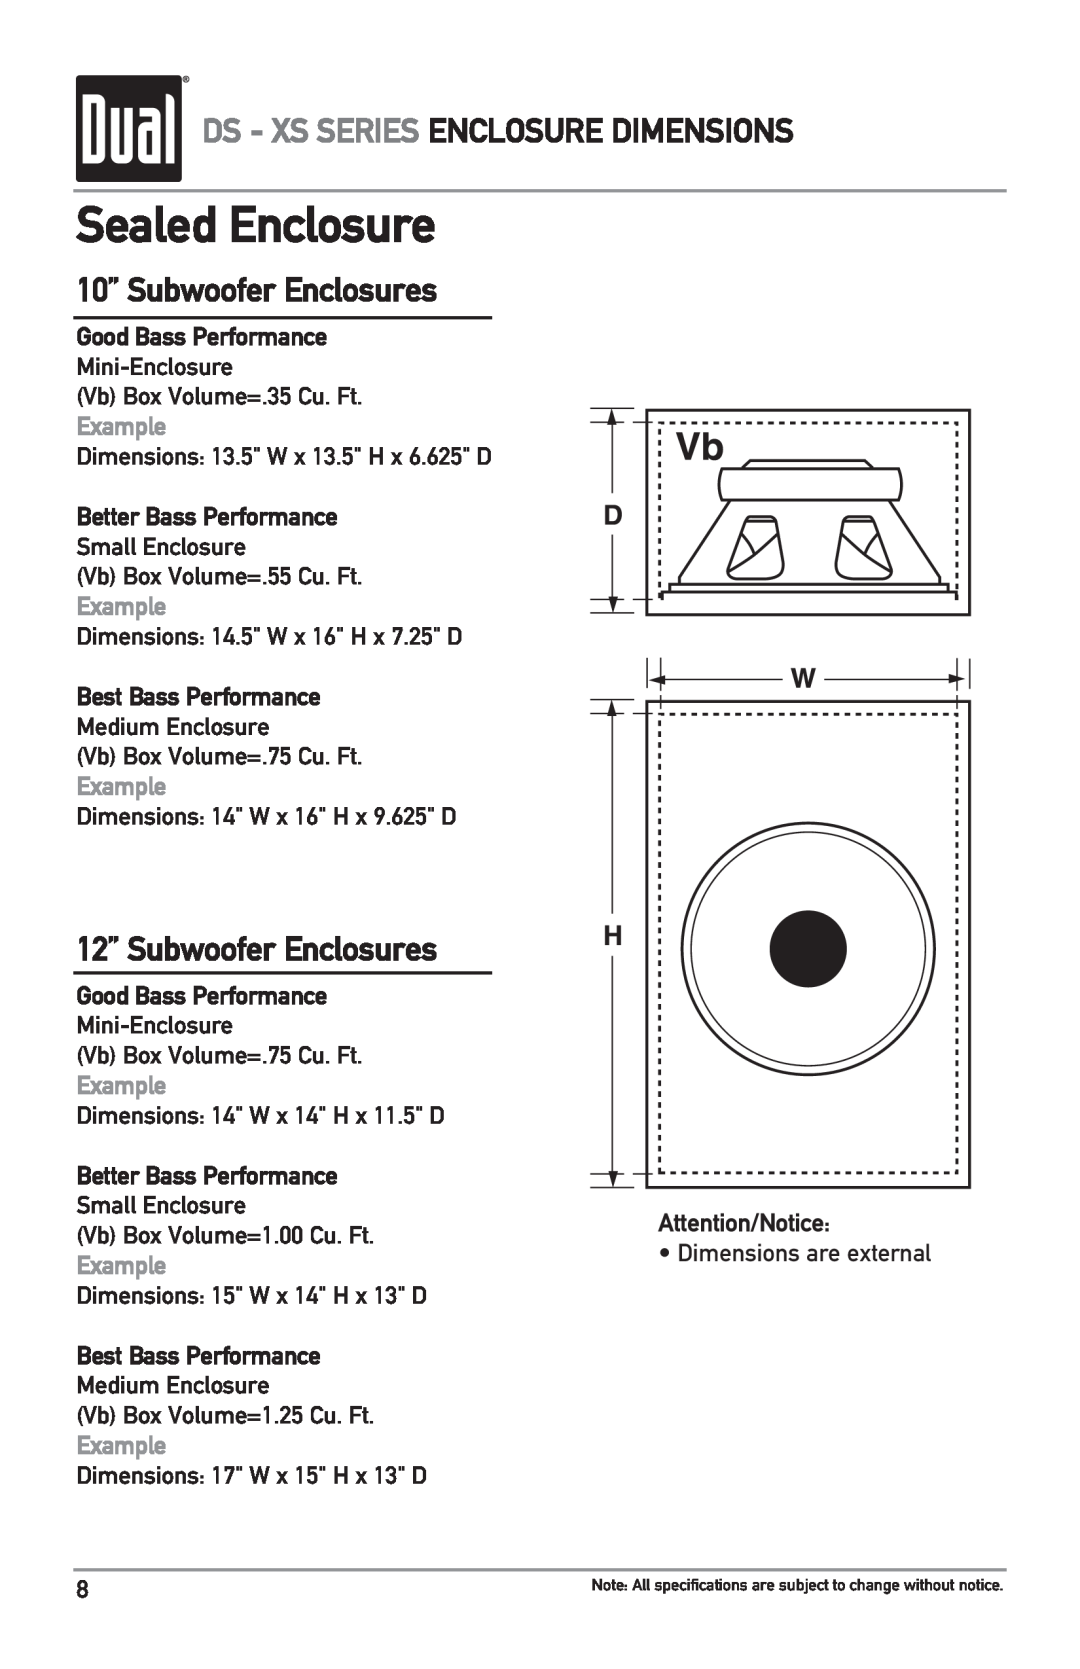 Dual DS10, XS10 Sealed Enclosure, Ds - Xs Series Enclosure Dimensions, 10” Subwoofer Enclosures, 12” Subwoofer Enclosures 